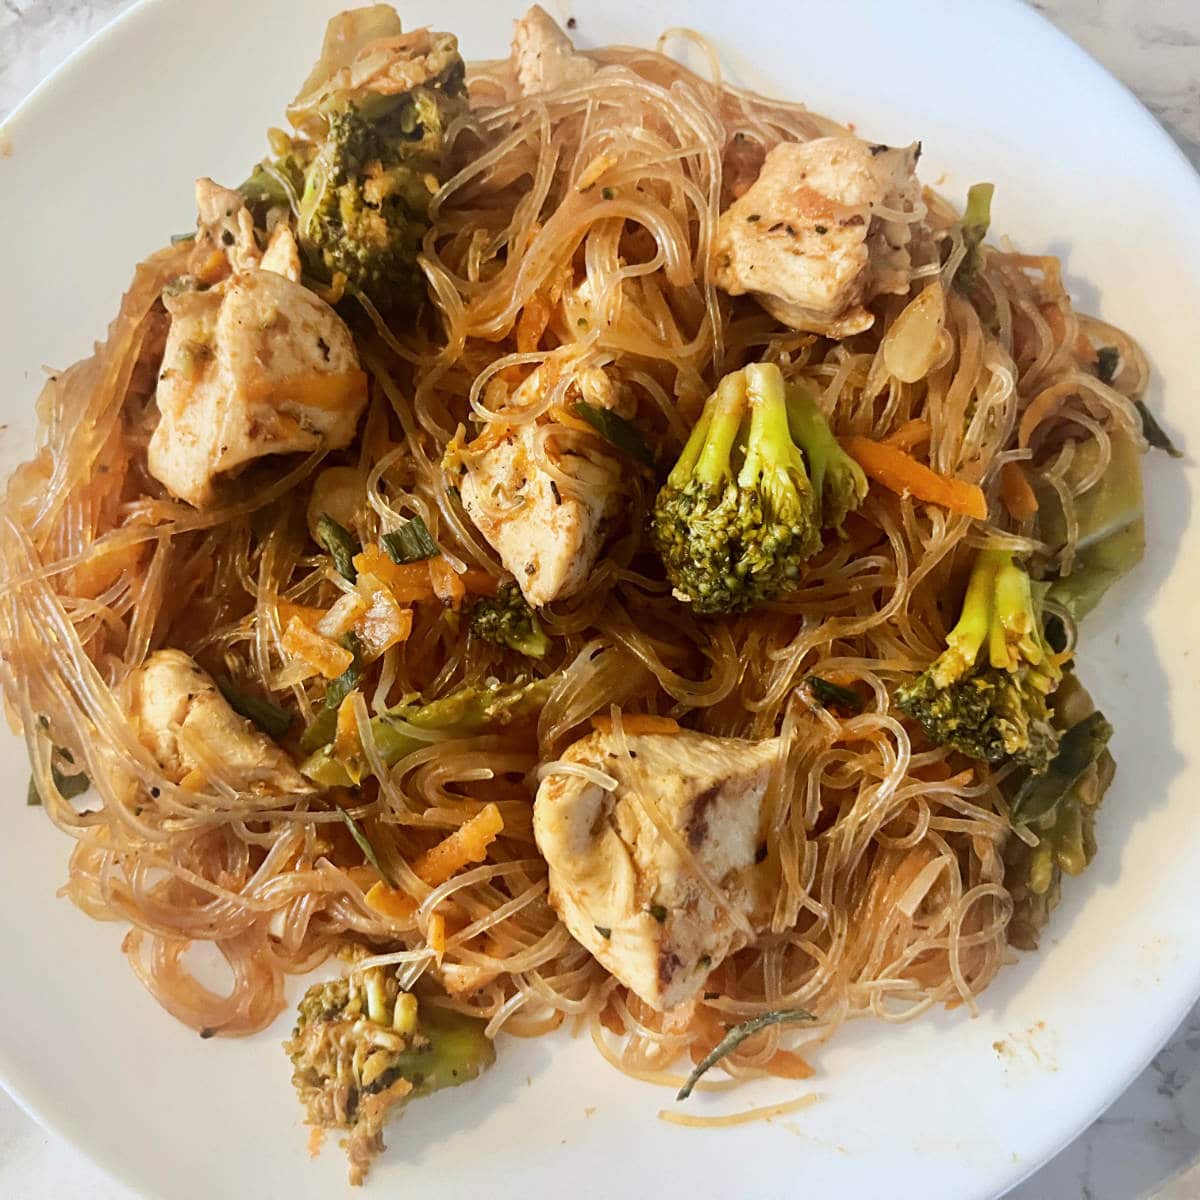 chicken stir fry with rice noodles, broccoli, and carrots